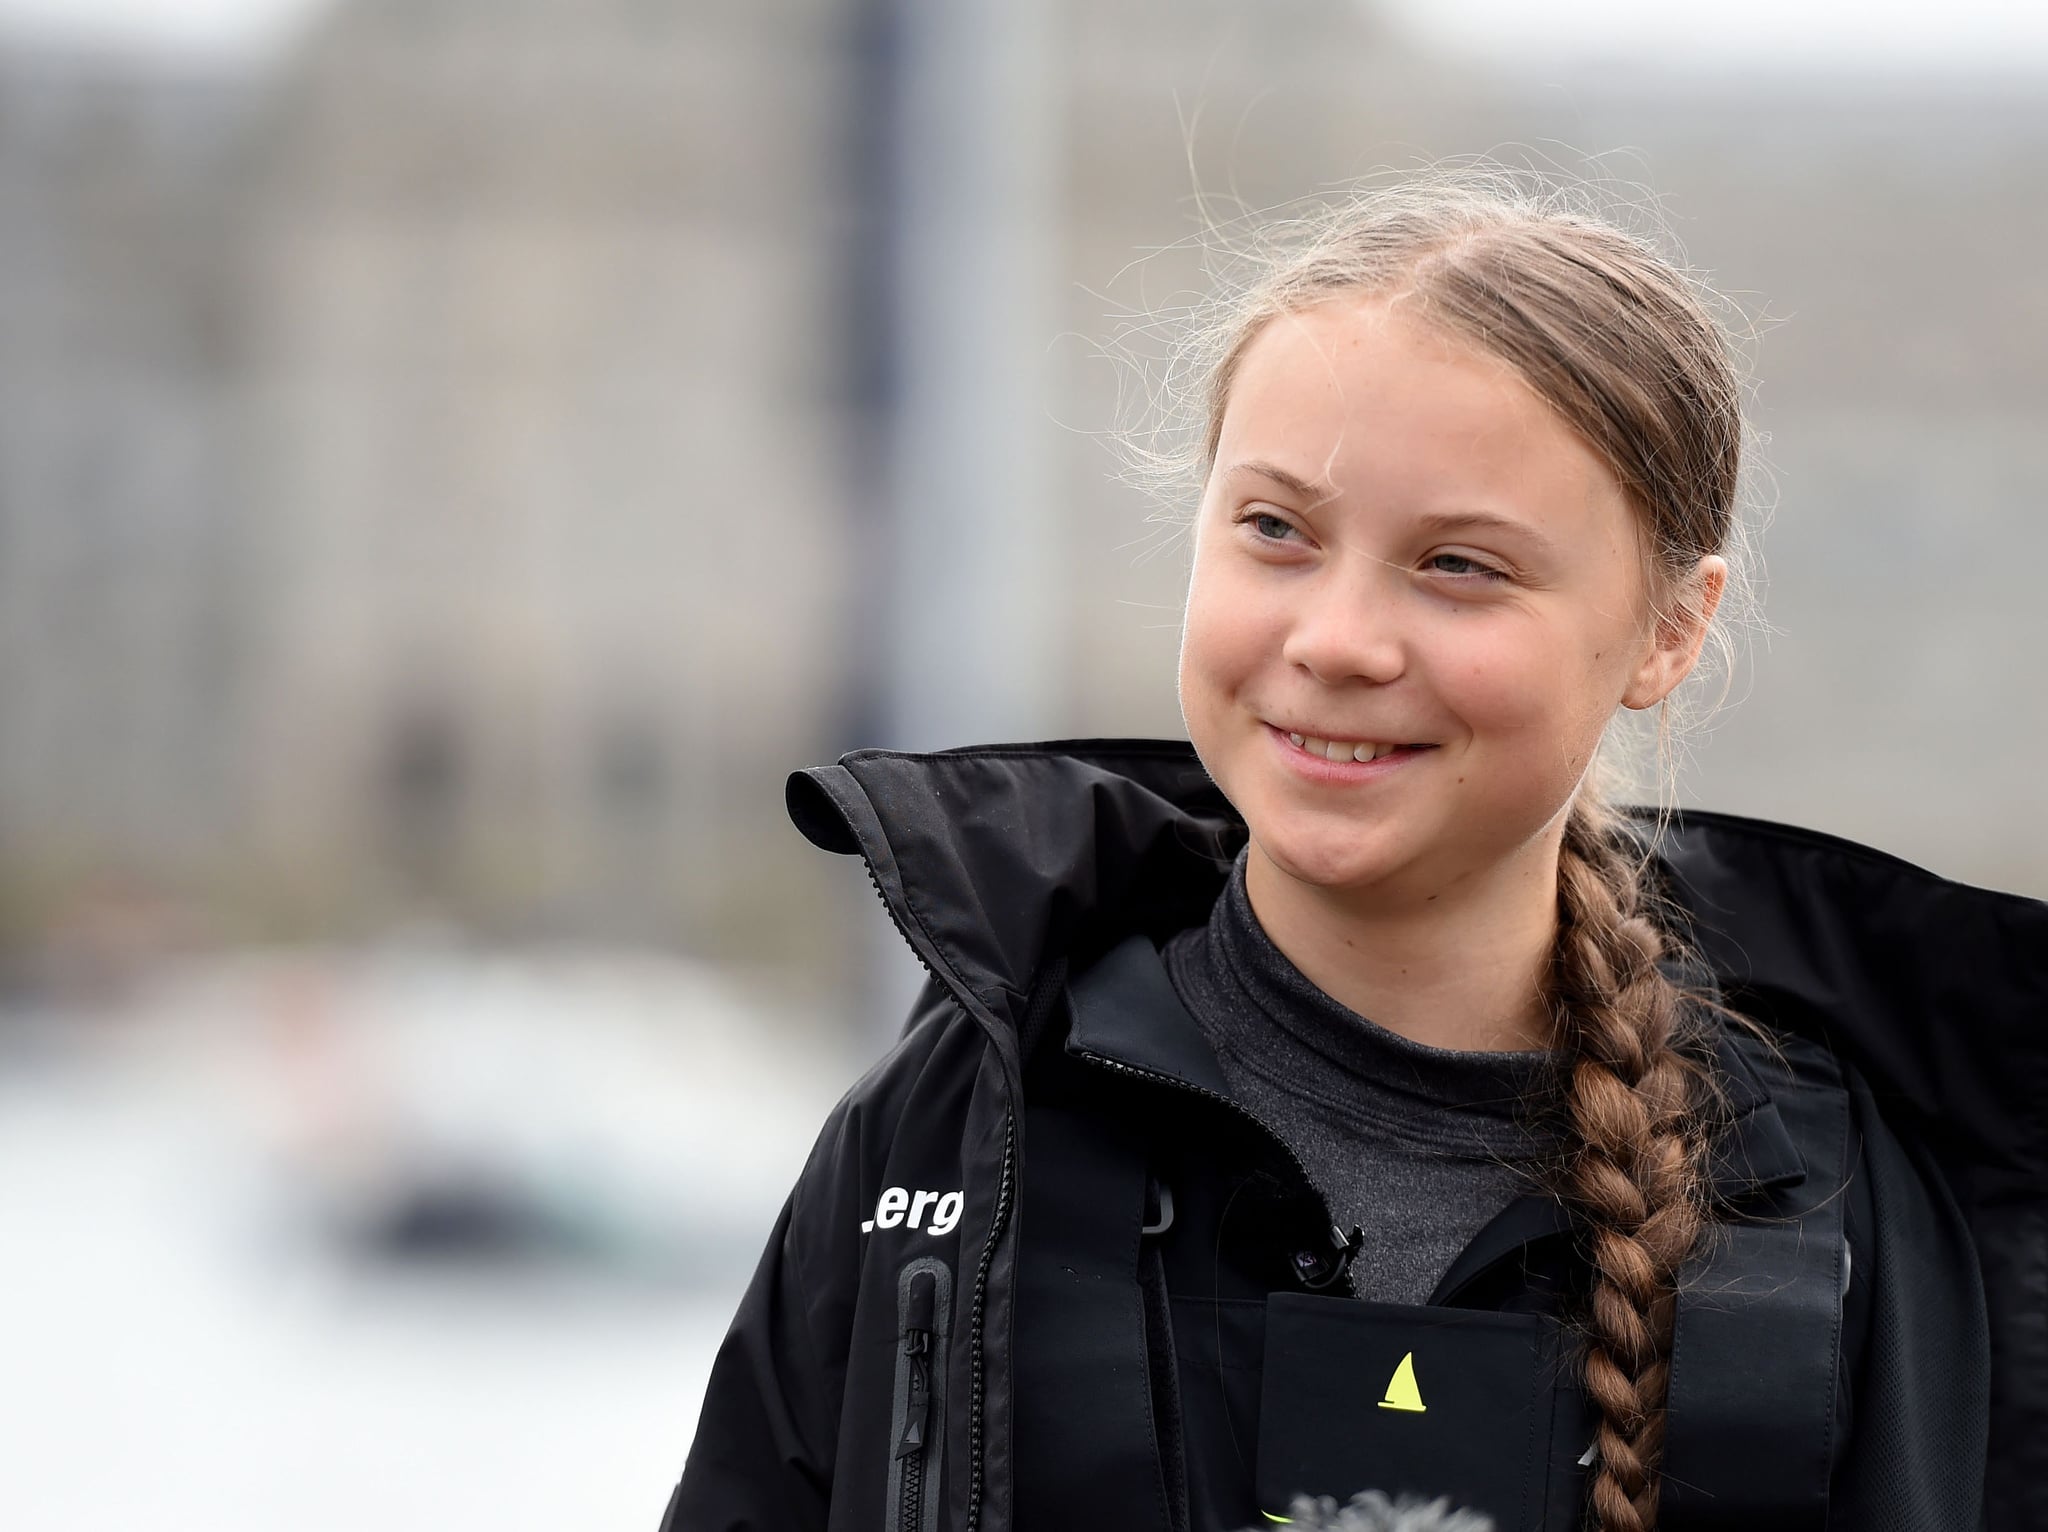 PLYMOUTH, ENGLAND - AUGUST 14: Climate change activist Greta Thunberg speaks at a press conference before setting sail for New York in the 60ft Malizia II yacht from Mayflower Marina, on August 14, 2019 in Plymouth, England. Greta Thunberg is a teenage activist born in Sweden in 2003. She began protesting outside the Belgian Parliament aged 15 and started the School Strike for Climate movement which has gained global popularity seeing school students campaigning against Climate Change on Fridays instead of attending their lessons. Greta has stopped flying as the aviation industry is responsible for 12% of CO2 emissions from all forms of  transports. Once in New York she will attend a climate change conference. (Photo by Finnbarr Webster/Getty Images)